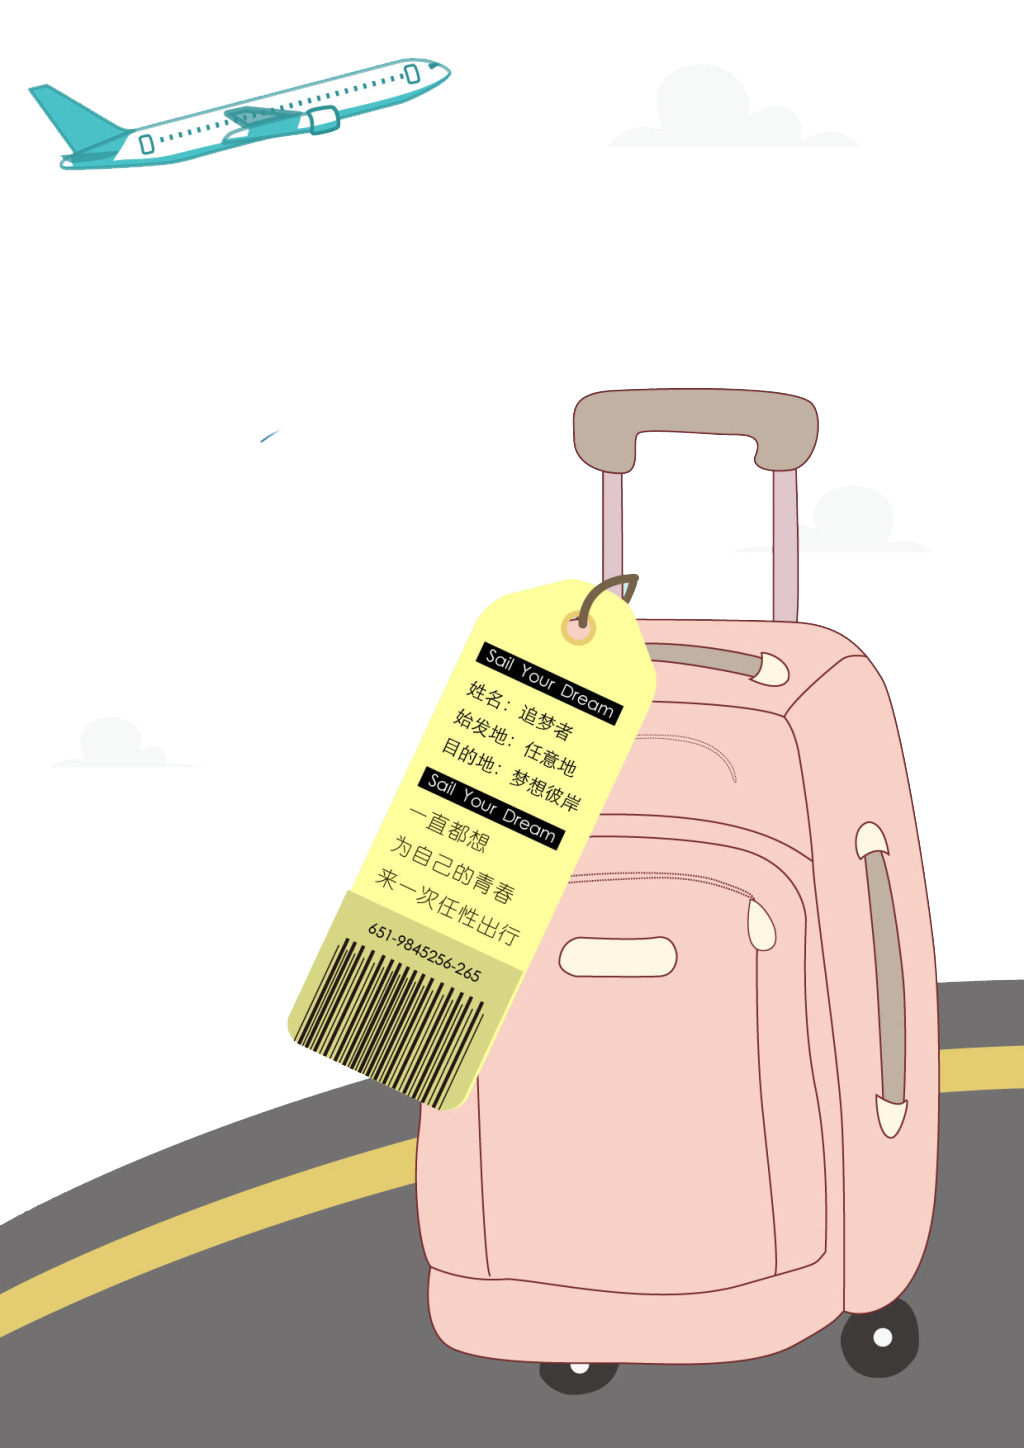 Airplane Suitcase Aircraft Elements Cartoon Free HQ Image Clipart